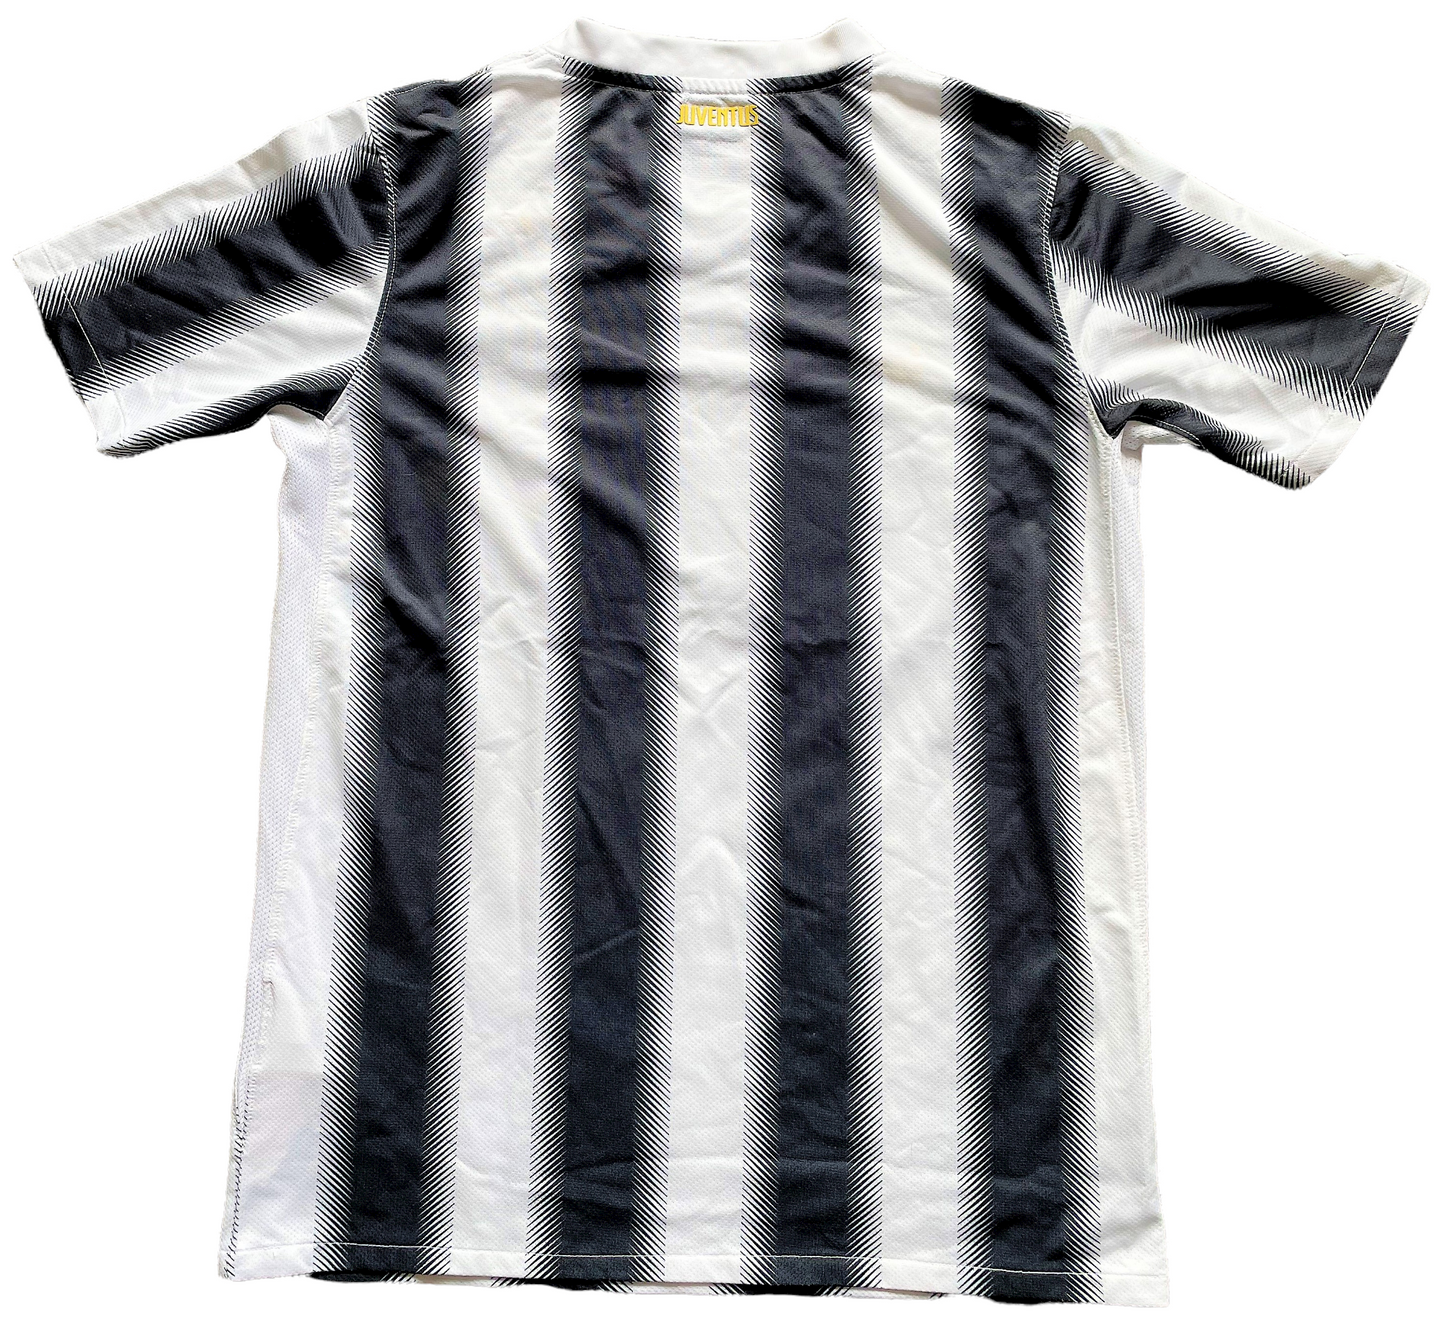 Juventus Home Shirt 2011 (excellent) Adults XS/Youths. Height 21 inches